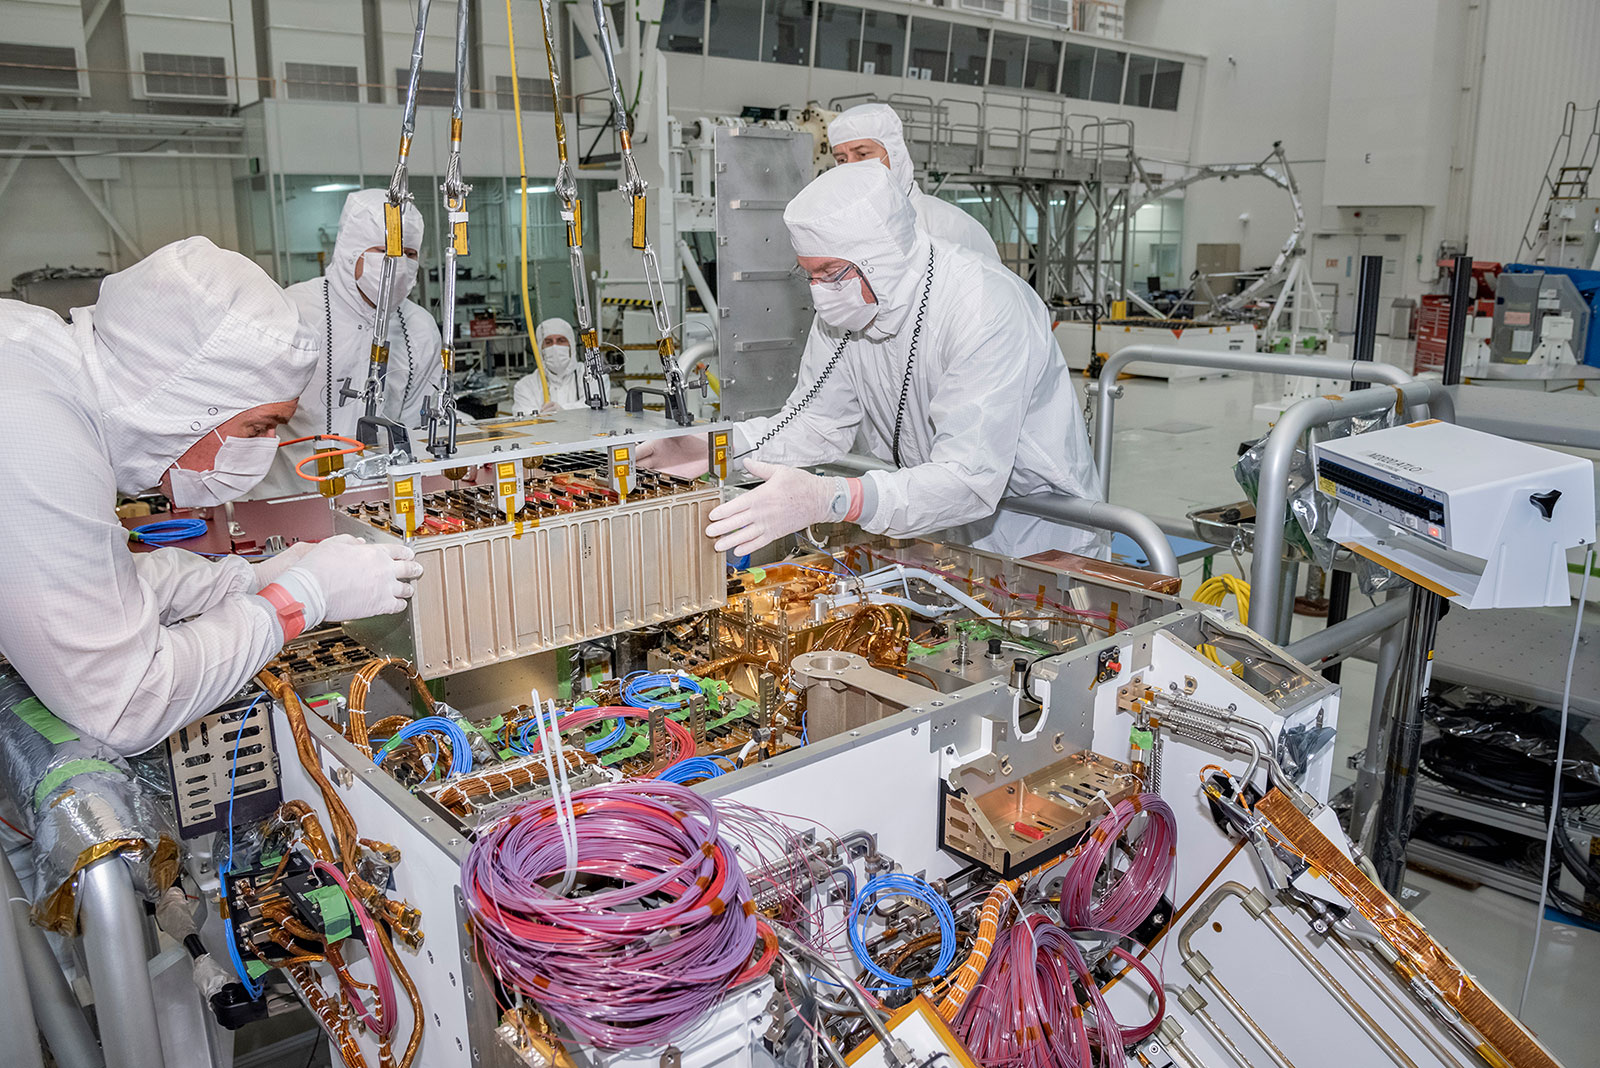 Technicians at JPL integrate the rover motor controller assembly (RMCA) into the Mars 2020 rover's body